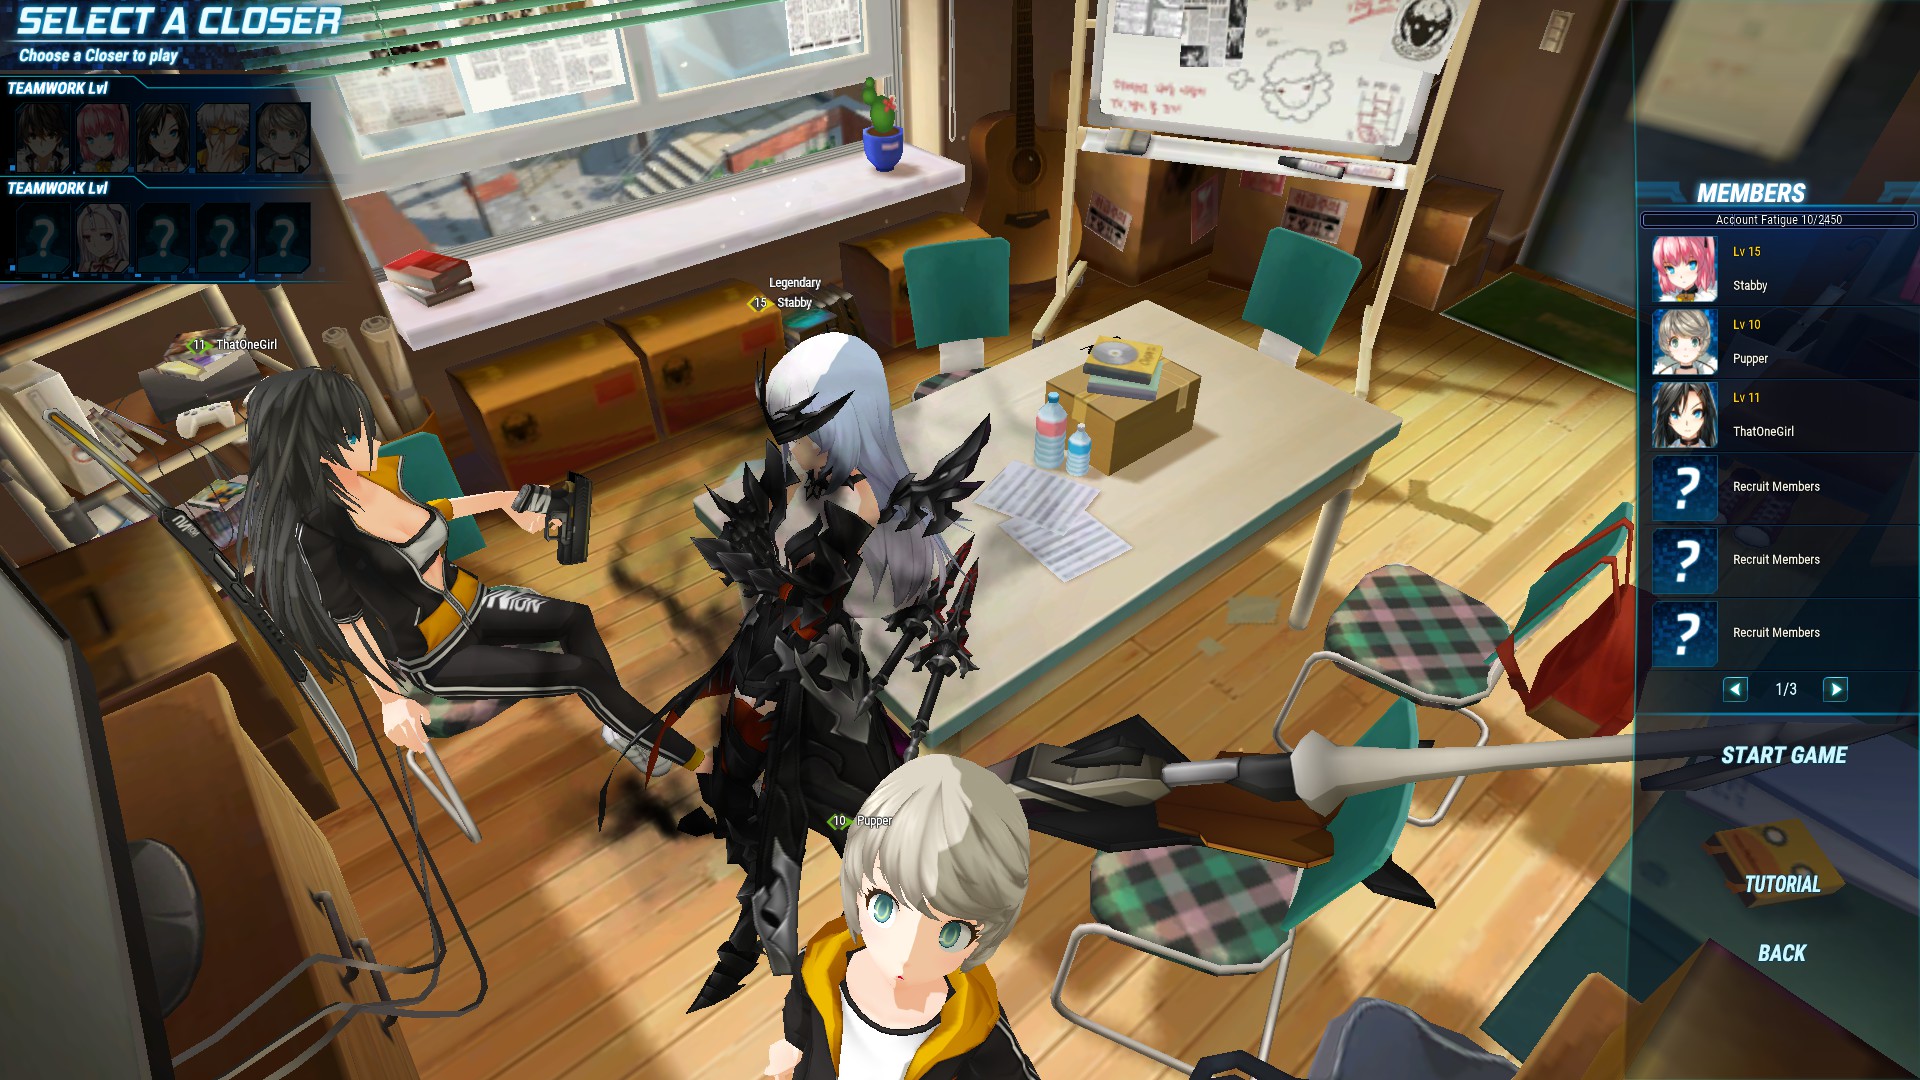 Closers Is A Fine Beat ‘Em Up